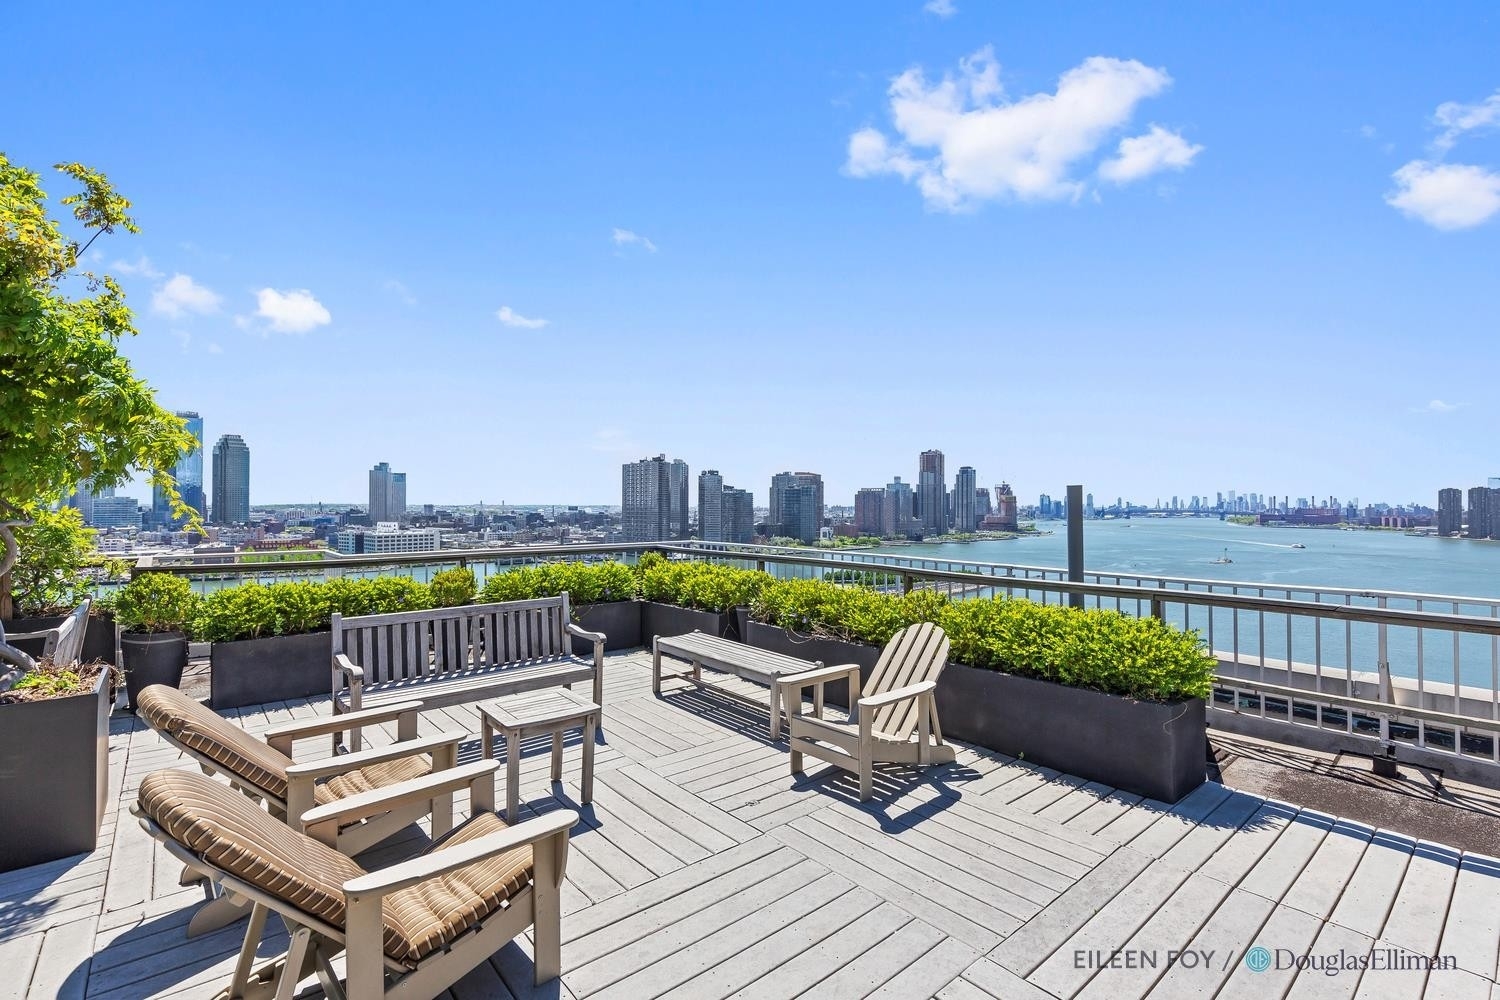 11. Co-op Properties for Sale at Cannon Point South, Inc., 45 SUTTON PL S, 2MN Sutton Place, New York, New York 10022